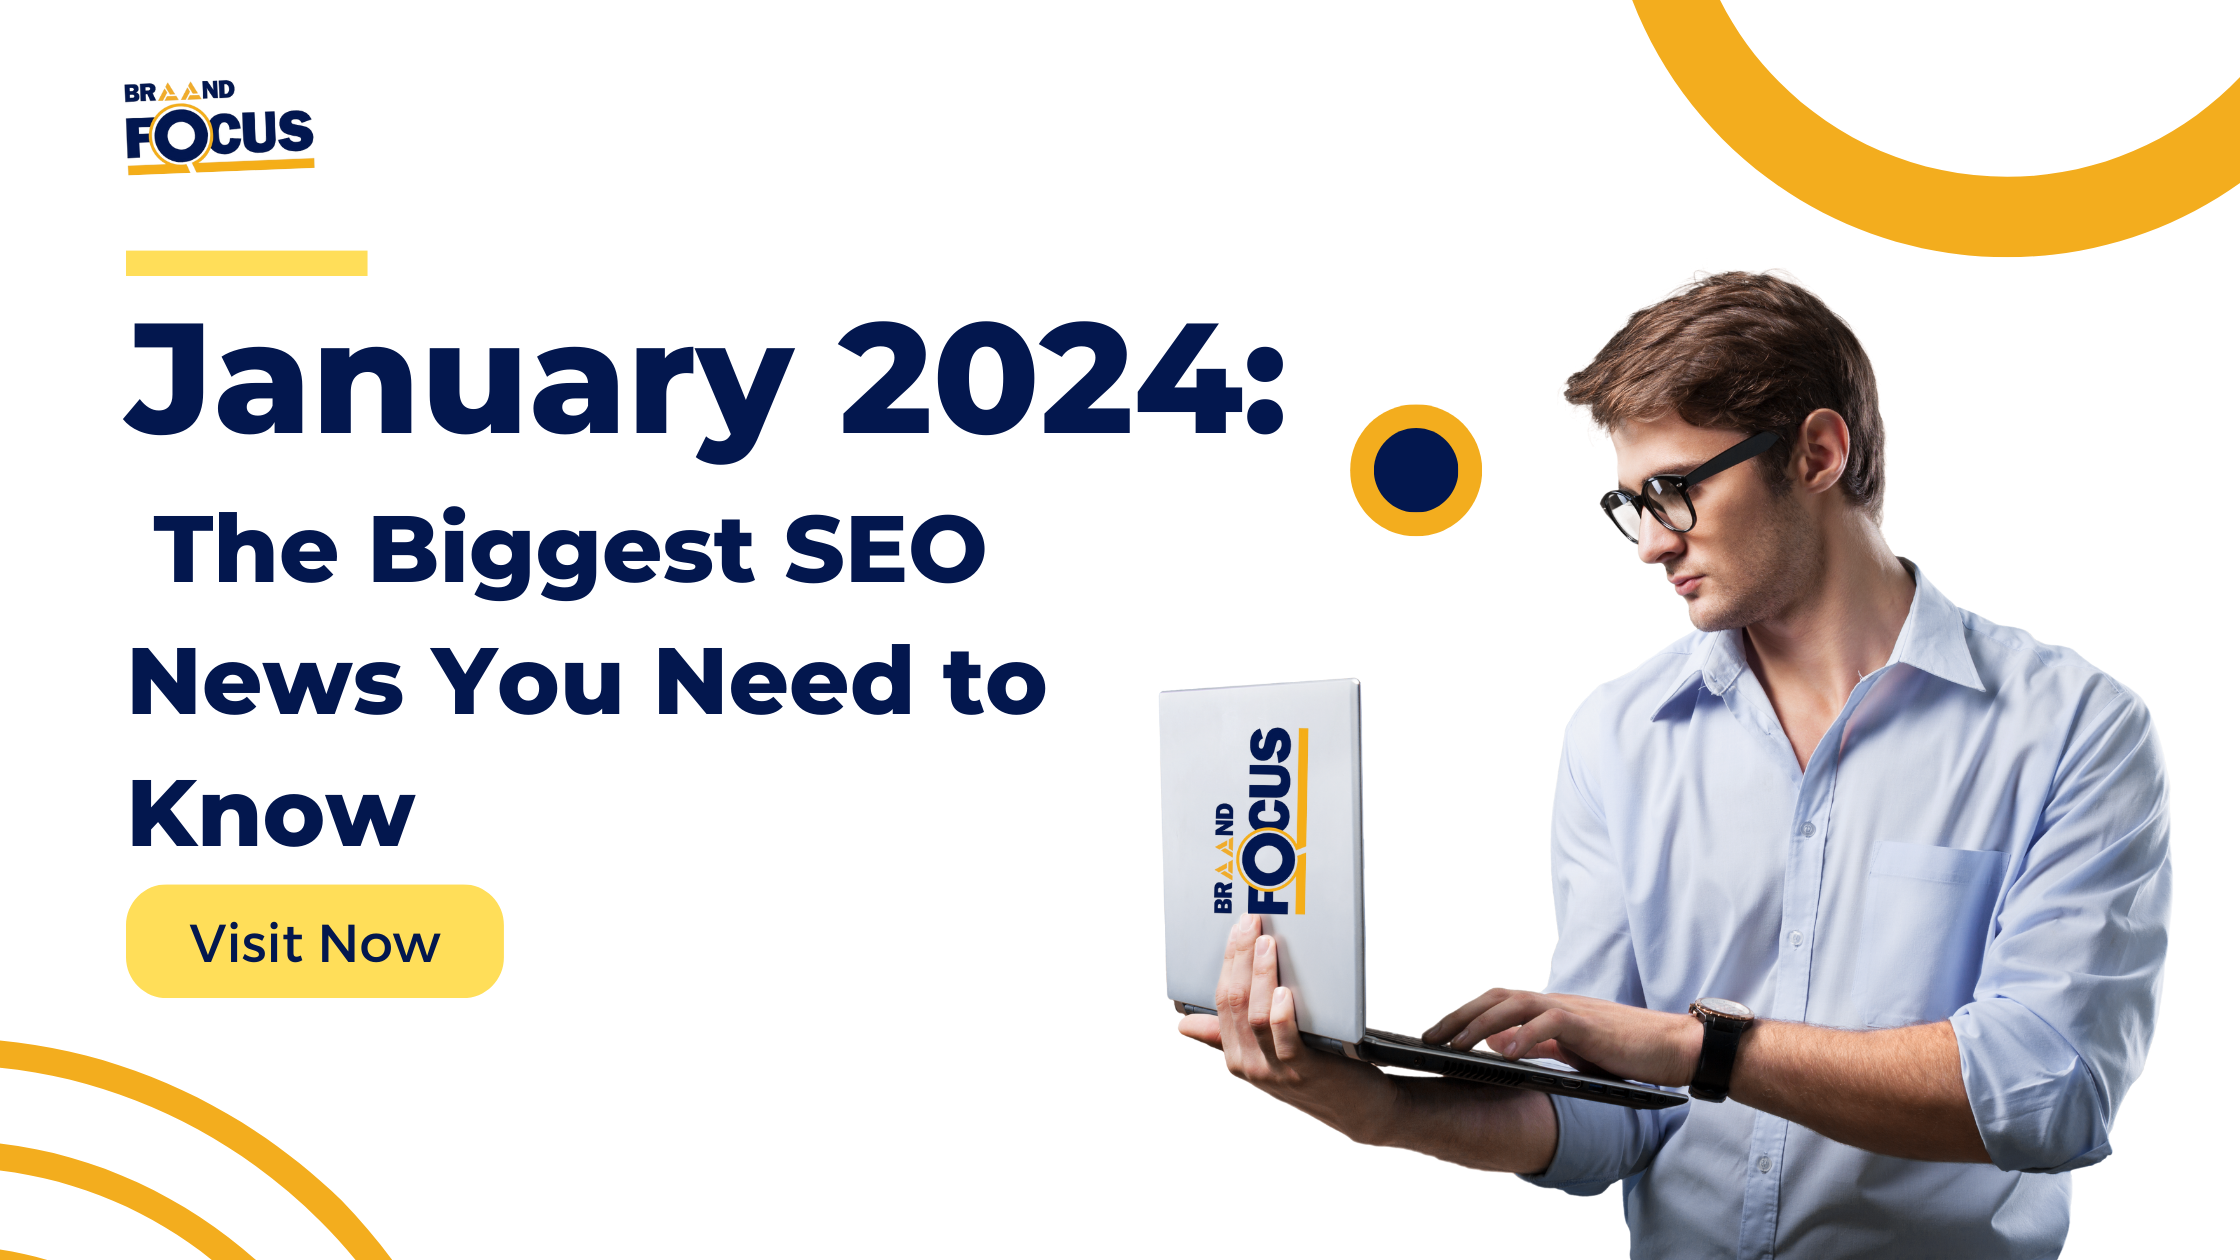 January's biggest SEO news: algorithm updates, mobile-first indexing, and voice search optimization. Stay ahead of the game!